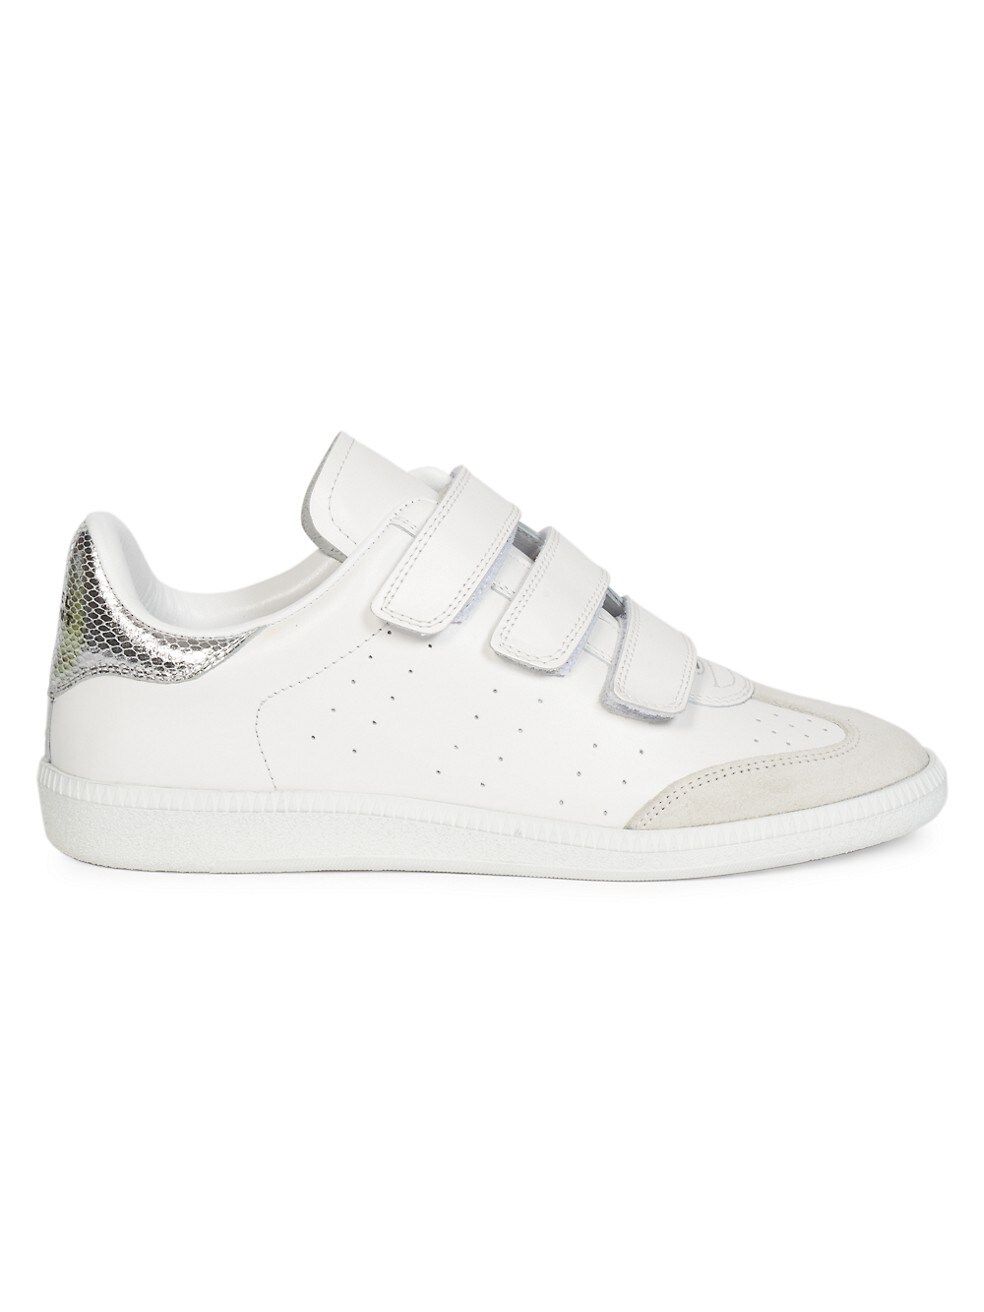 Beth Grip-Strap Leather Sneakers | Saks Fifth Avenue